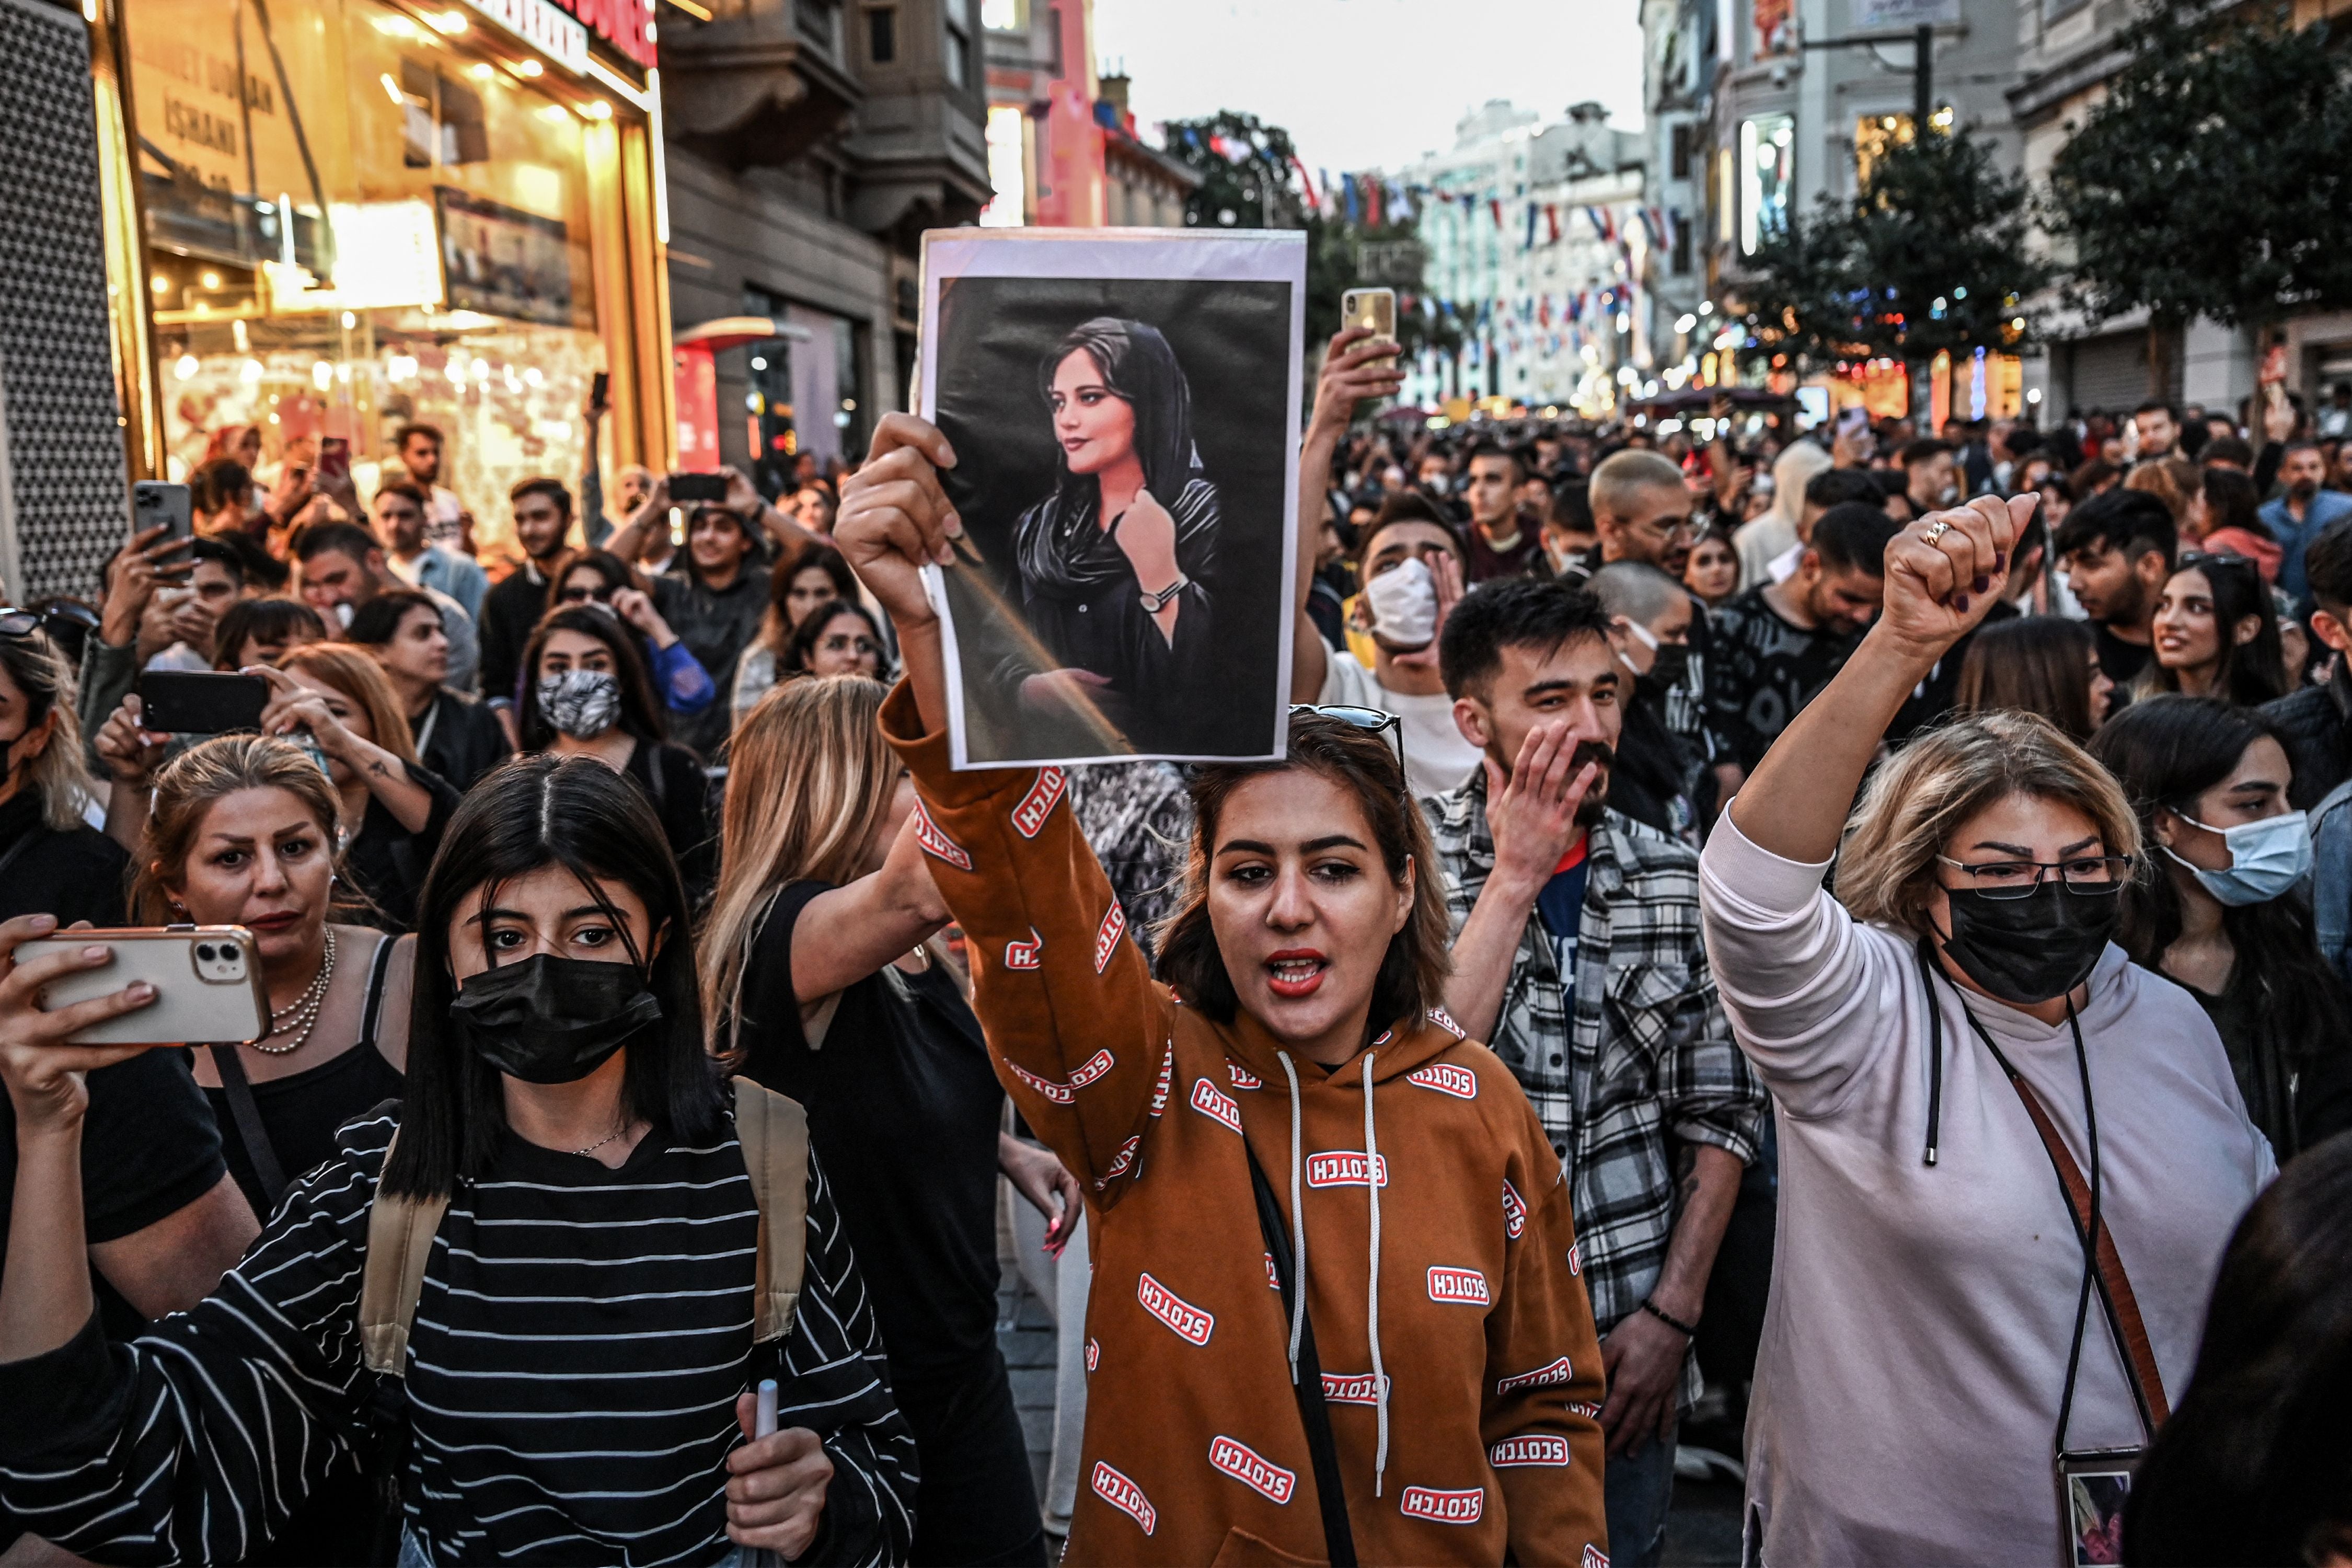 A protester holds a portrait of Mahsa Amini during a demonstration in support of the young Iranian woman who died after being arrested in Tehran